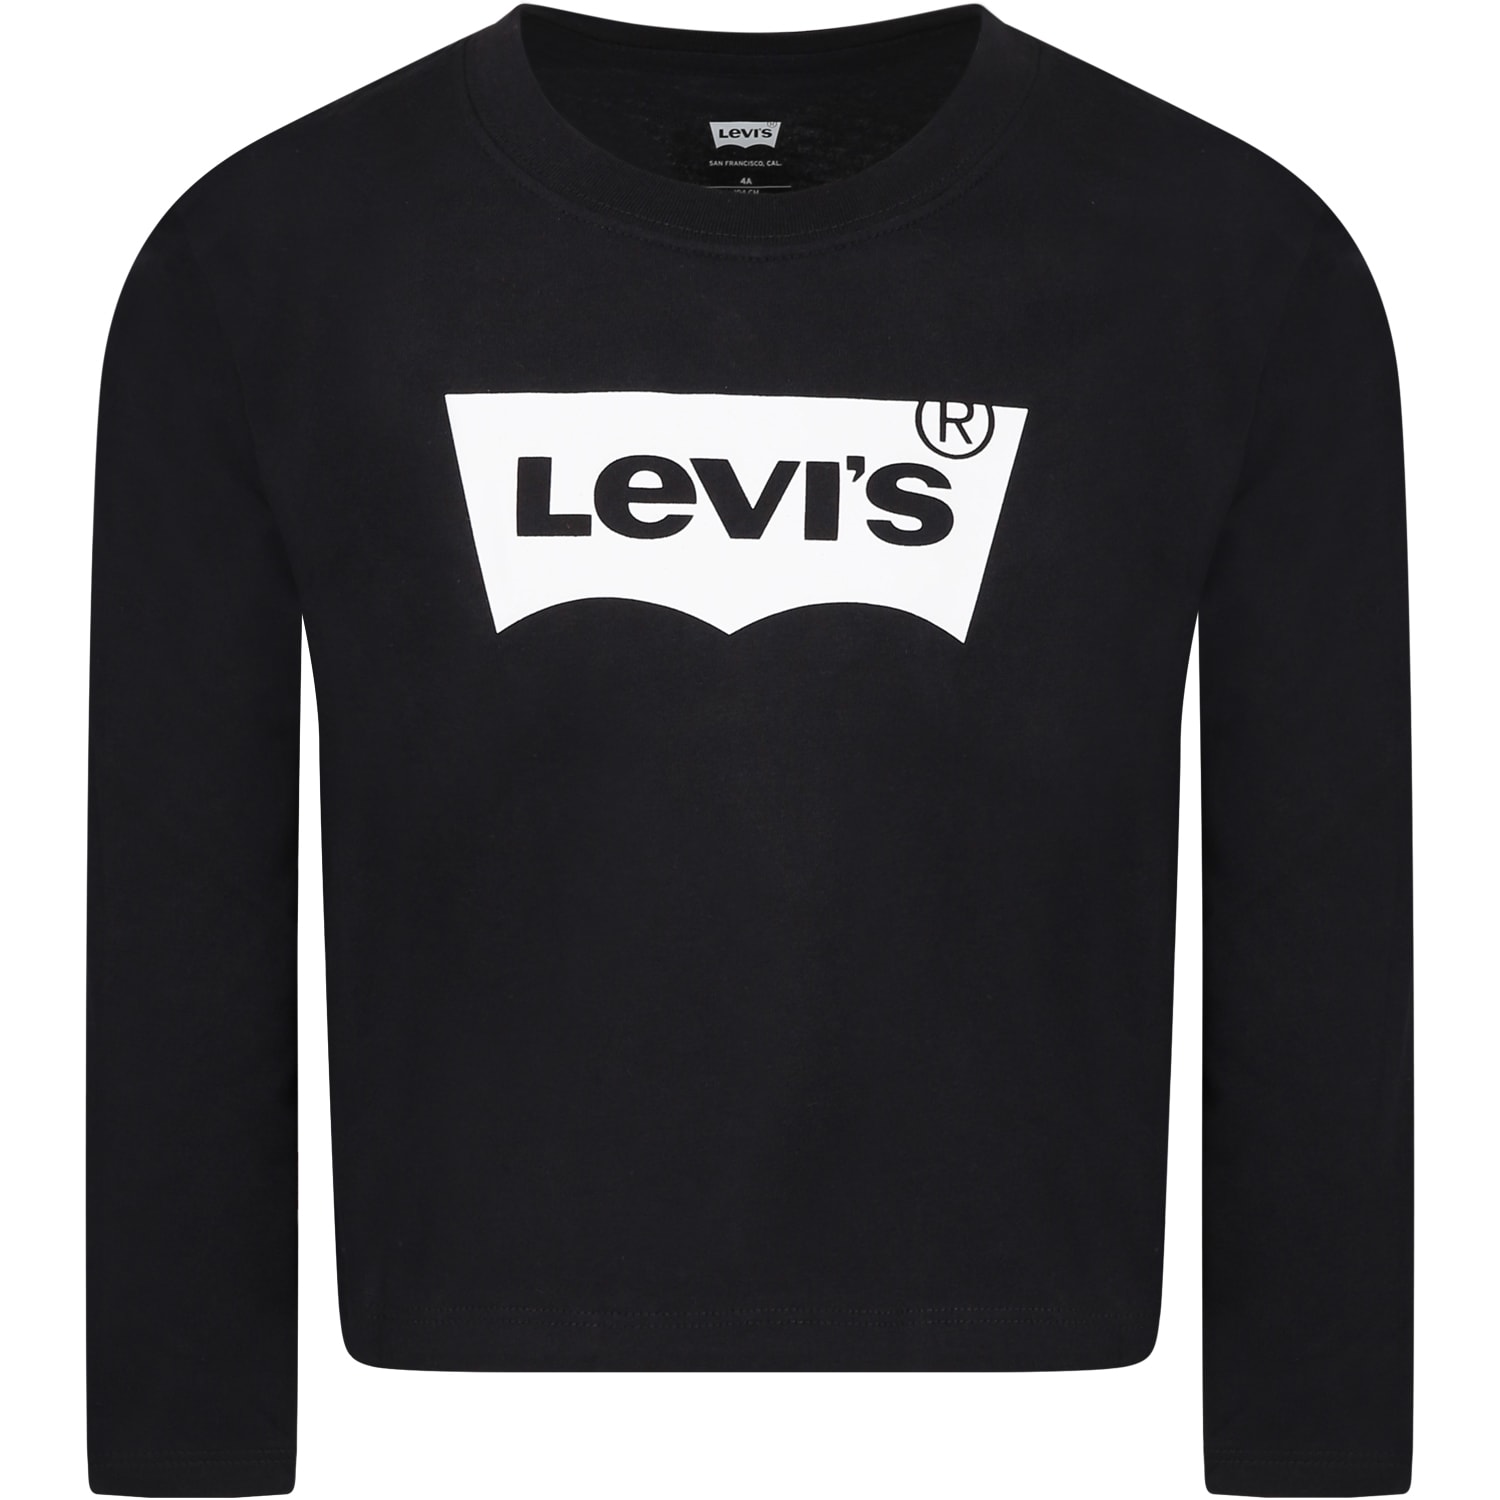 Levi's Kids' Black T-shirt For Boy With Logo